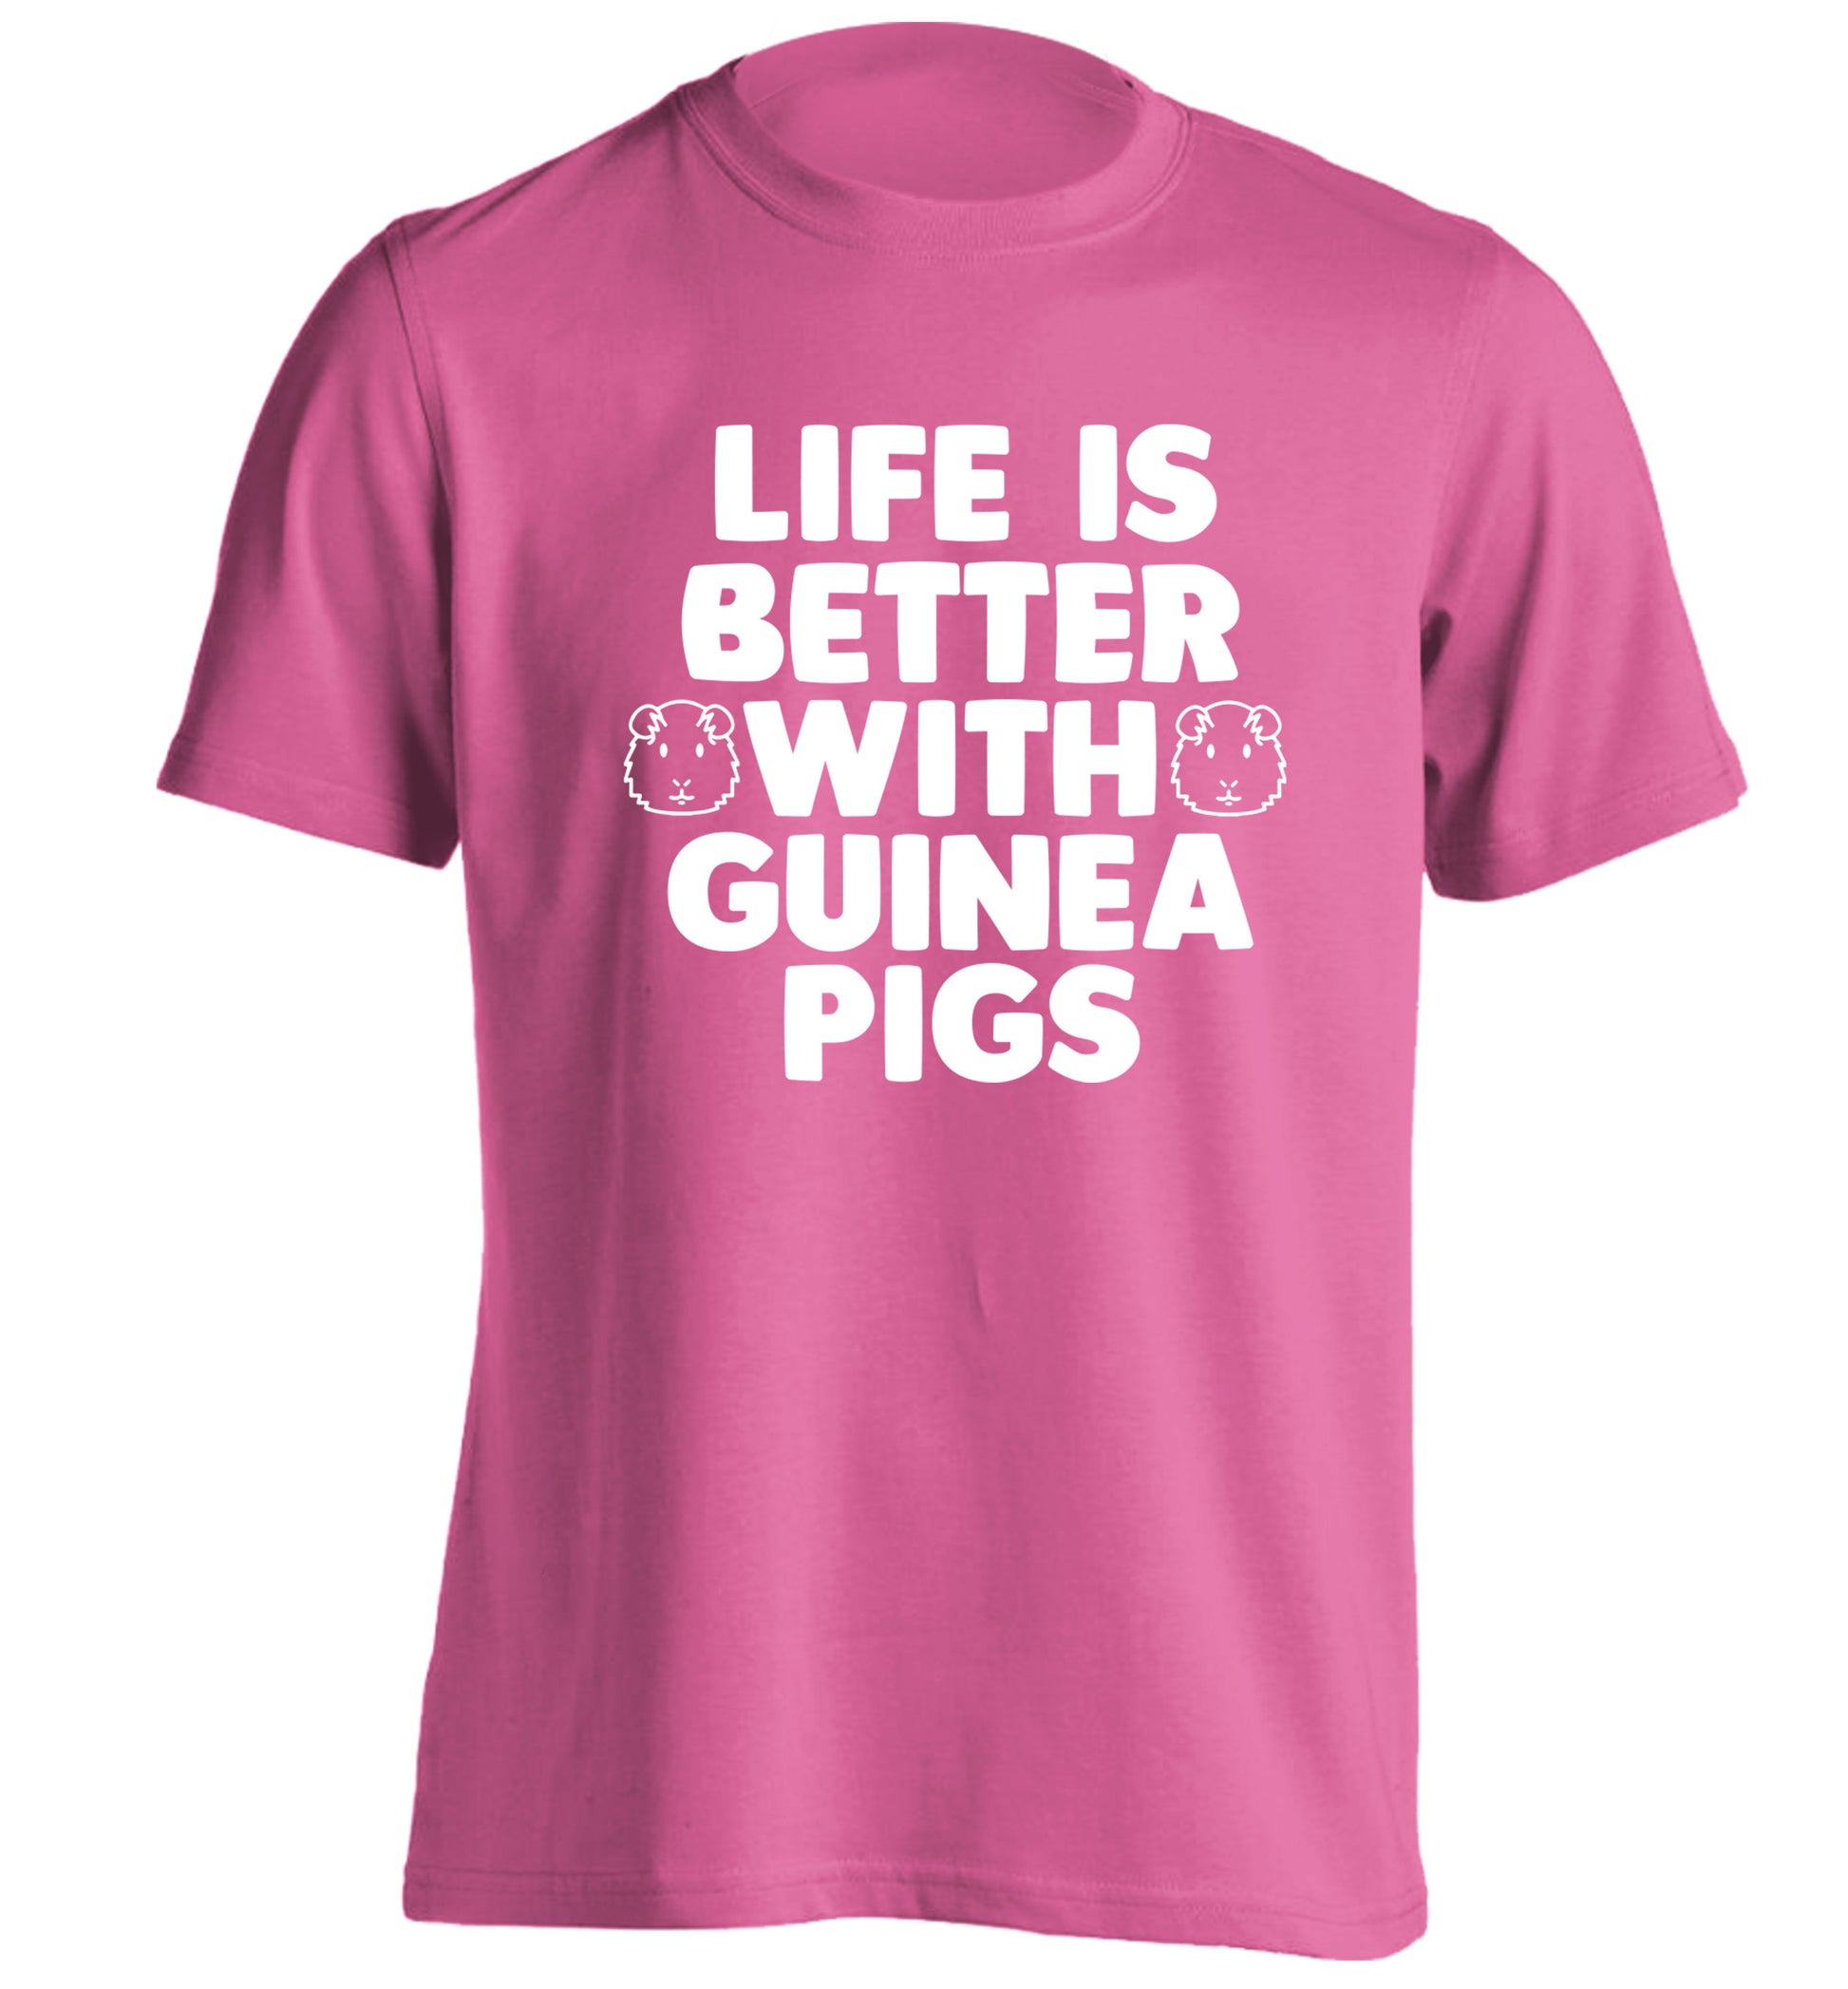 Life is better with guinea pigs adults unisex pink Tshirt 2XL